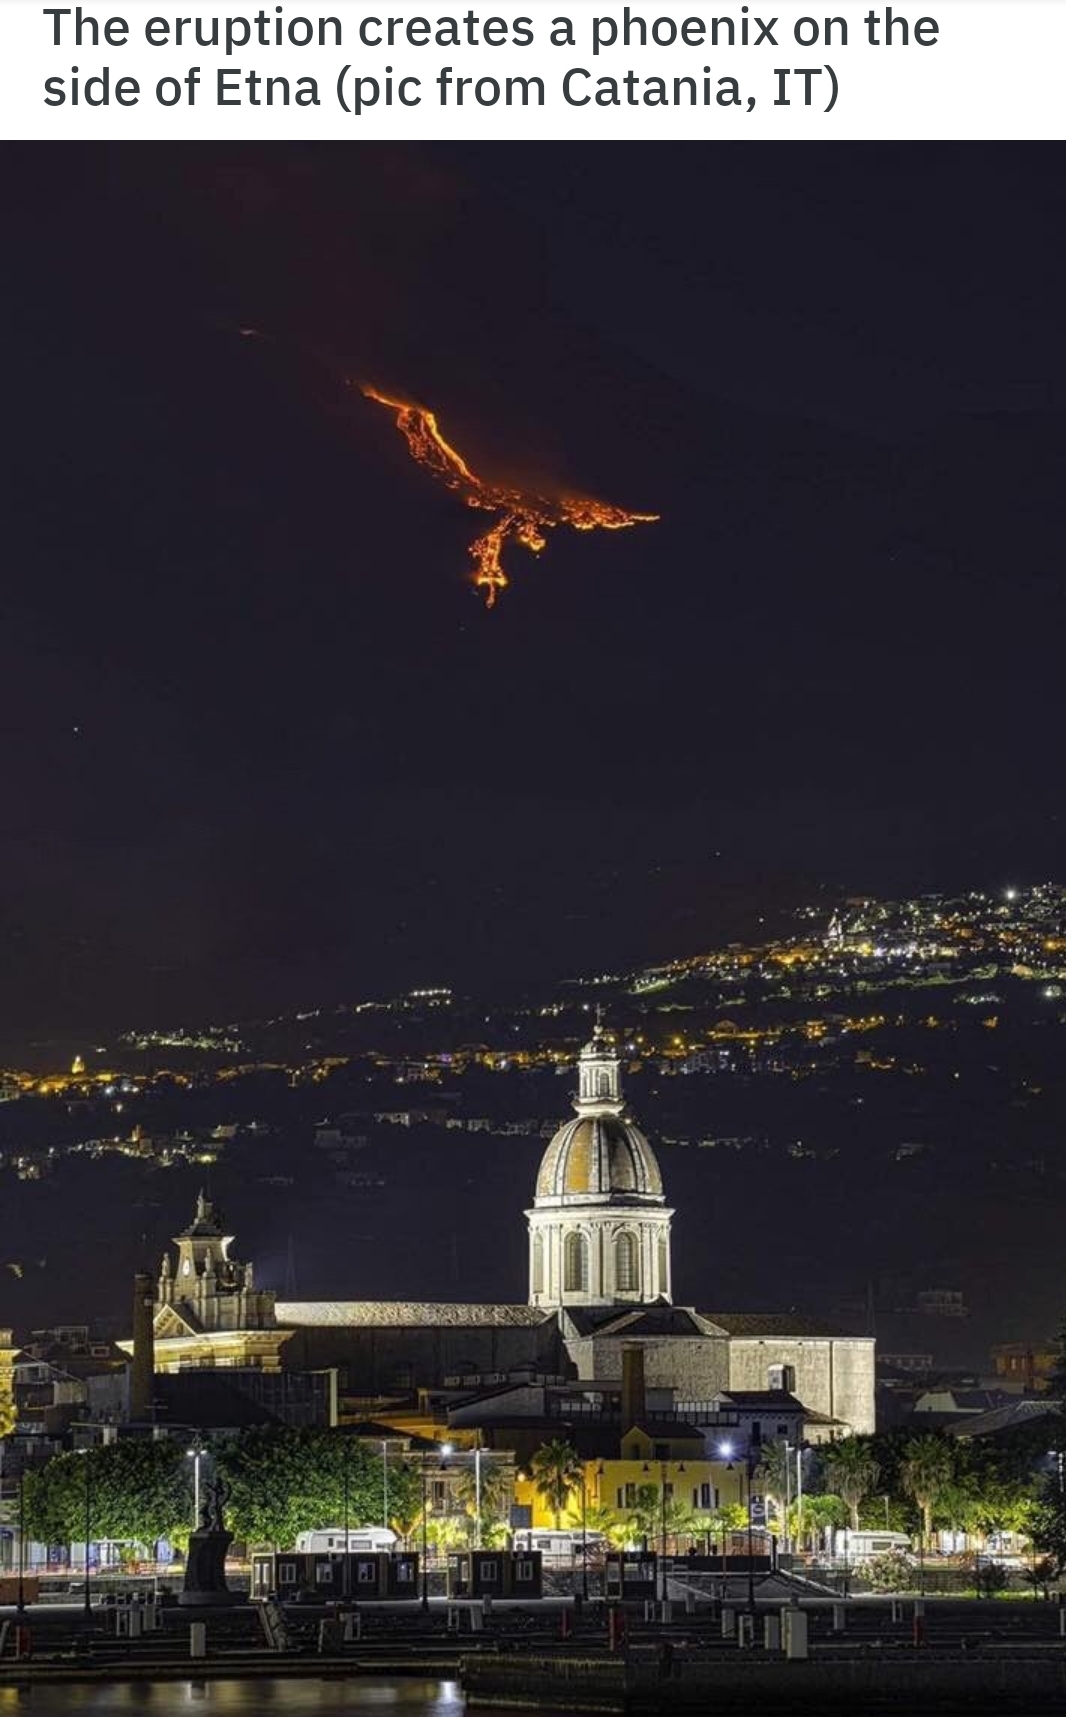 etna phoenix - The eruption creates a phoenix on the side of Etna pic from Catania, It